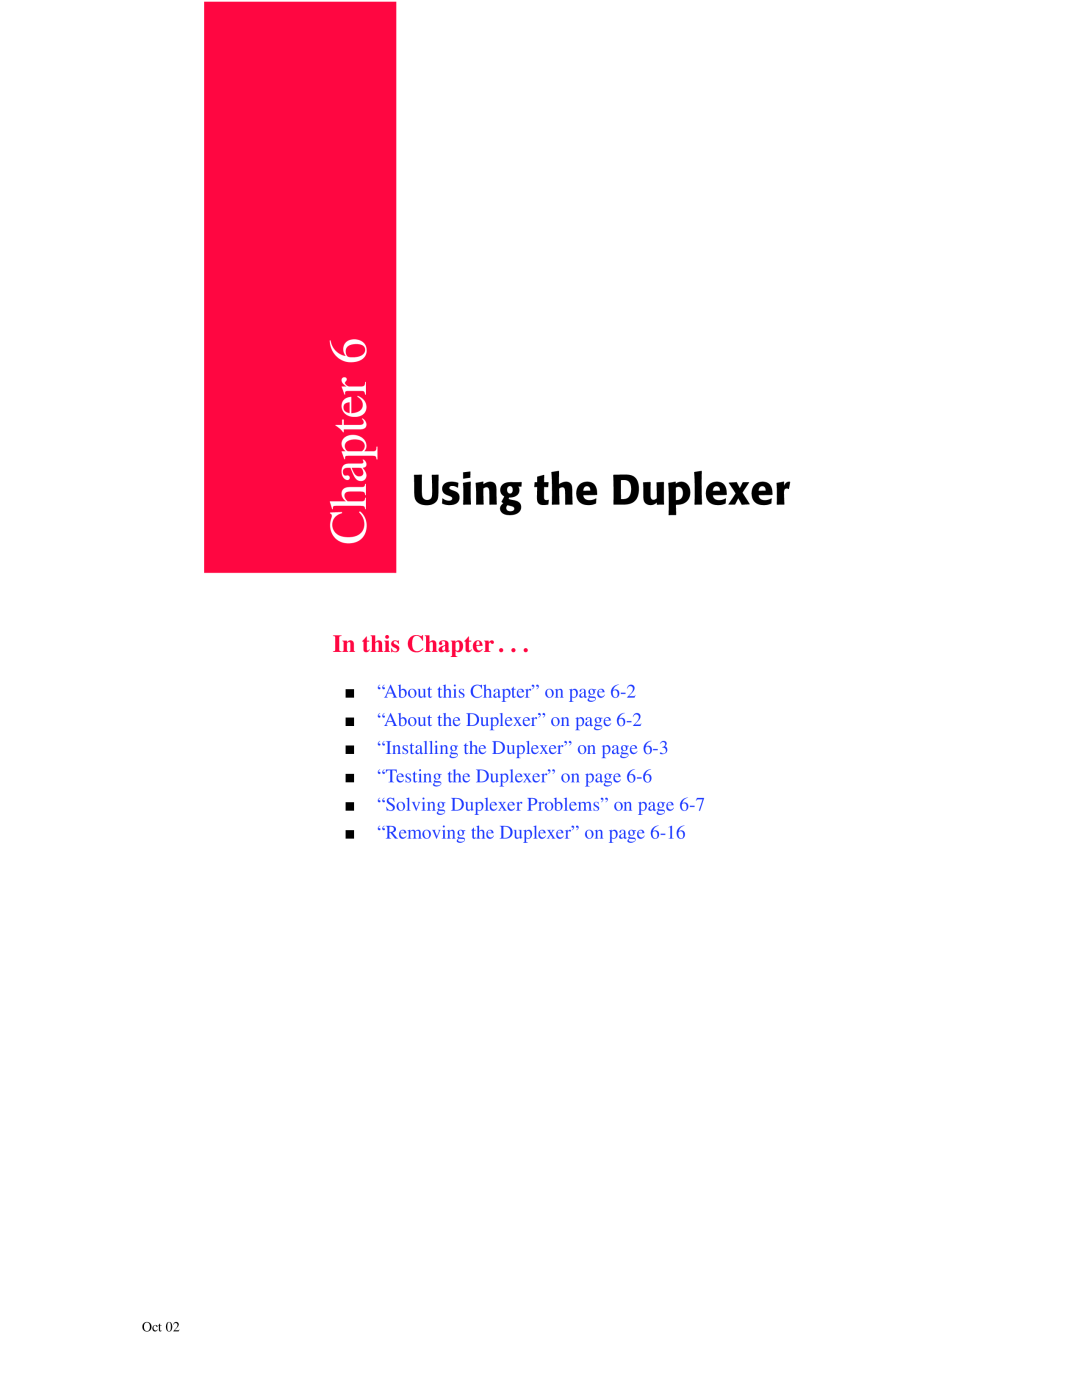 Oki 6100 manual Using the Duplexer, In this Chapter, “About this Chapter” on page “About the Duplexer” on page 